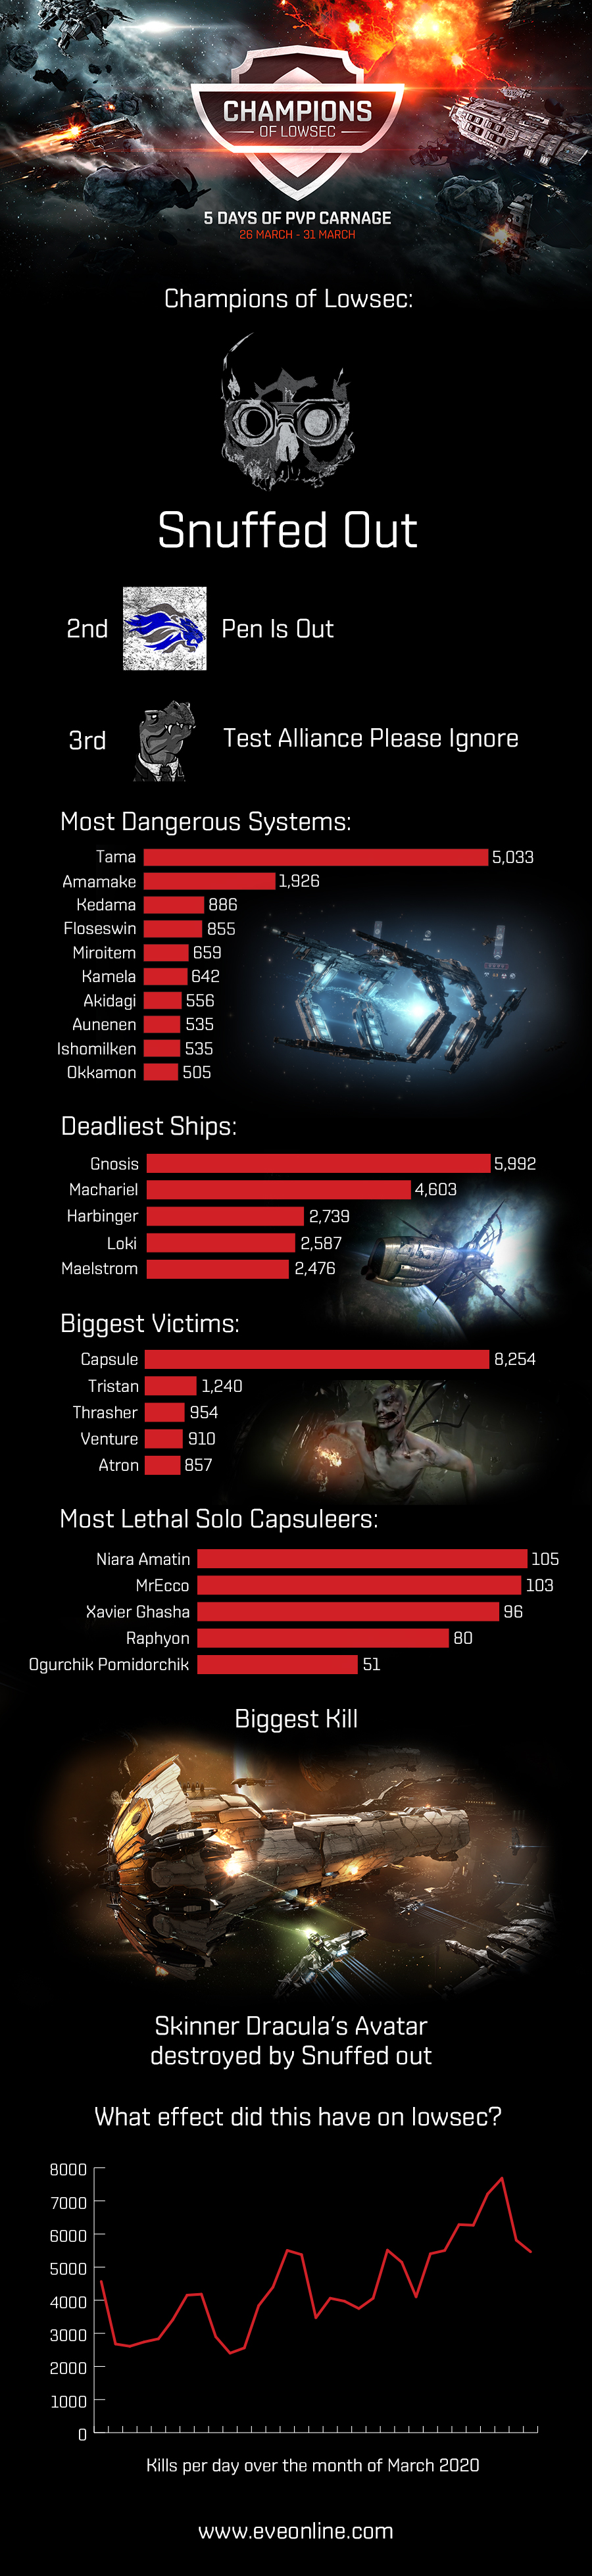 champions of lowsec infographic